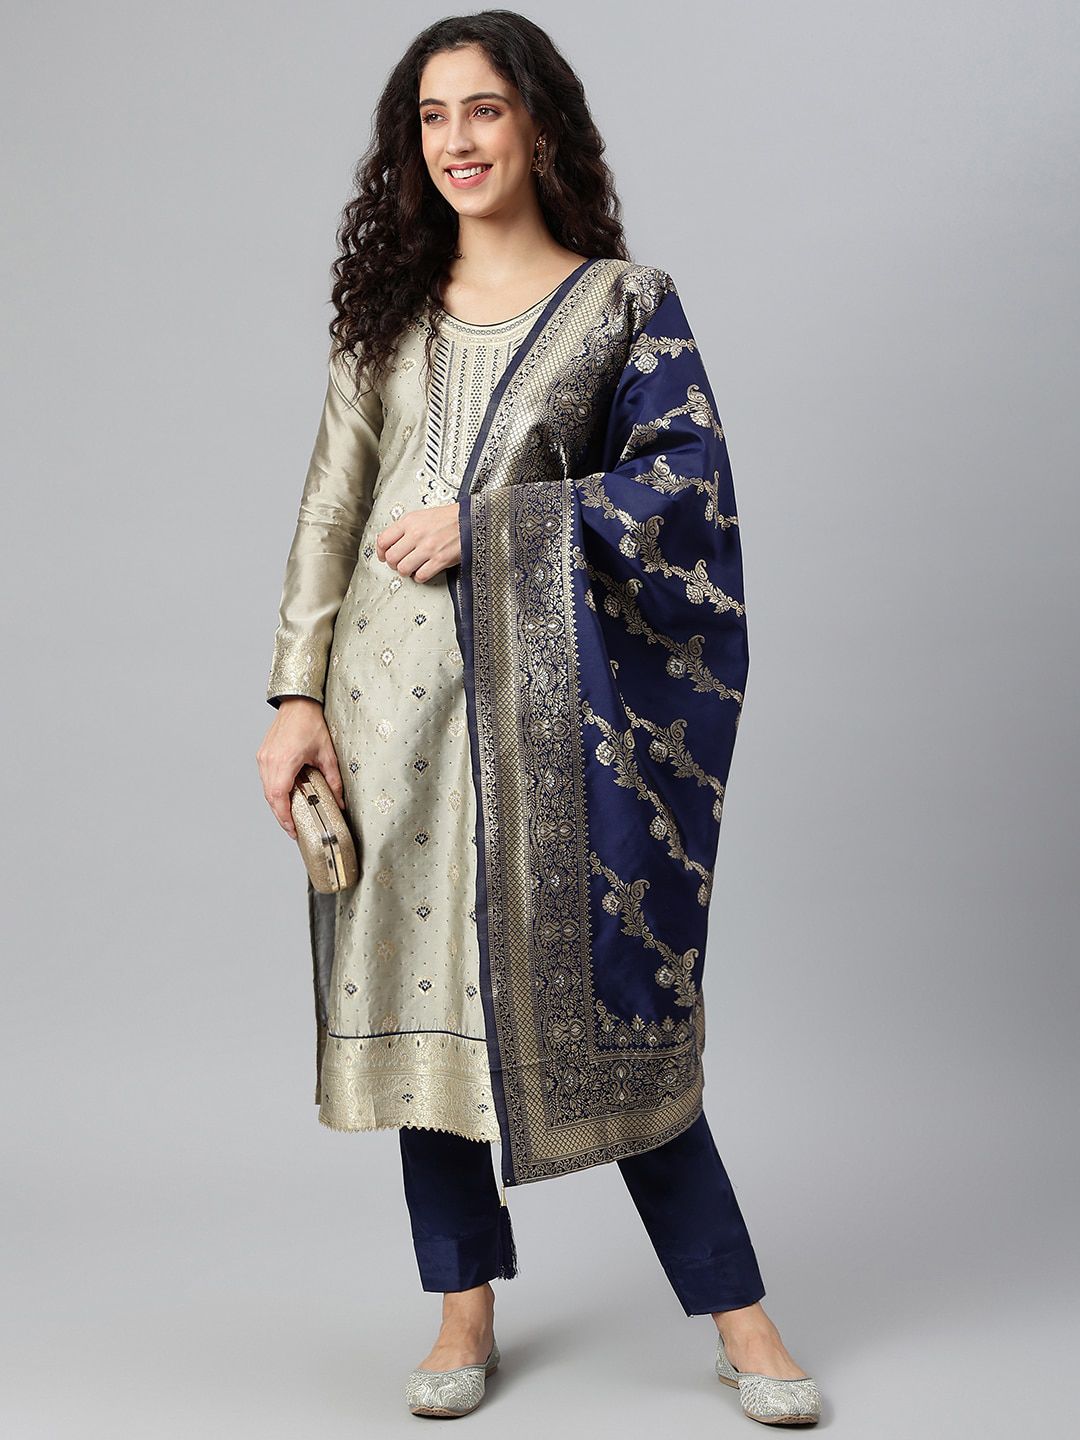 Lilots Grey & Blue Unstitched Dress Material Price in India